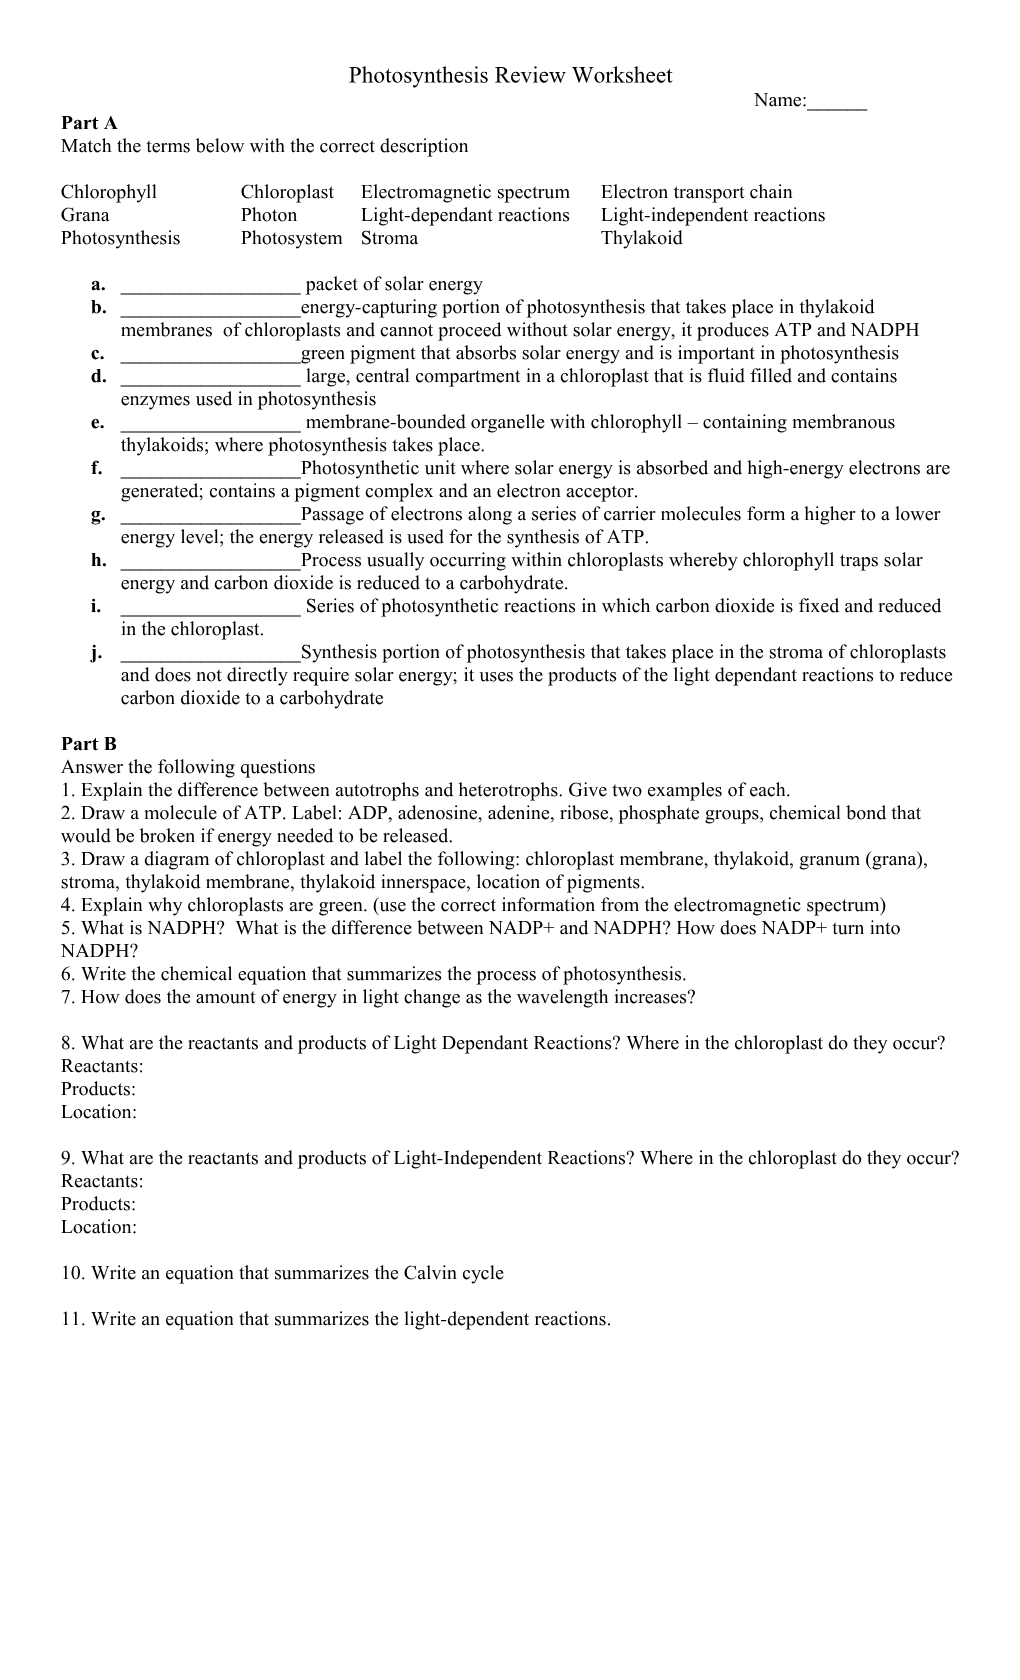 Photosynthesis Review Worksheet s1